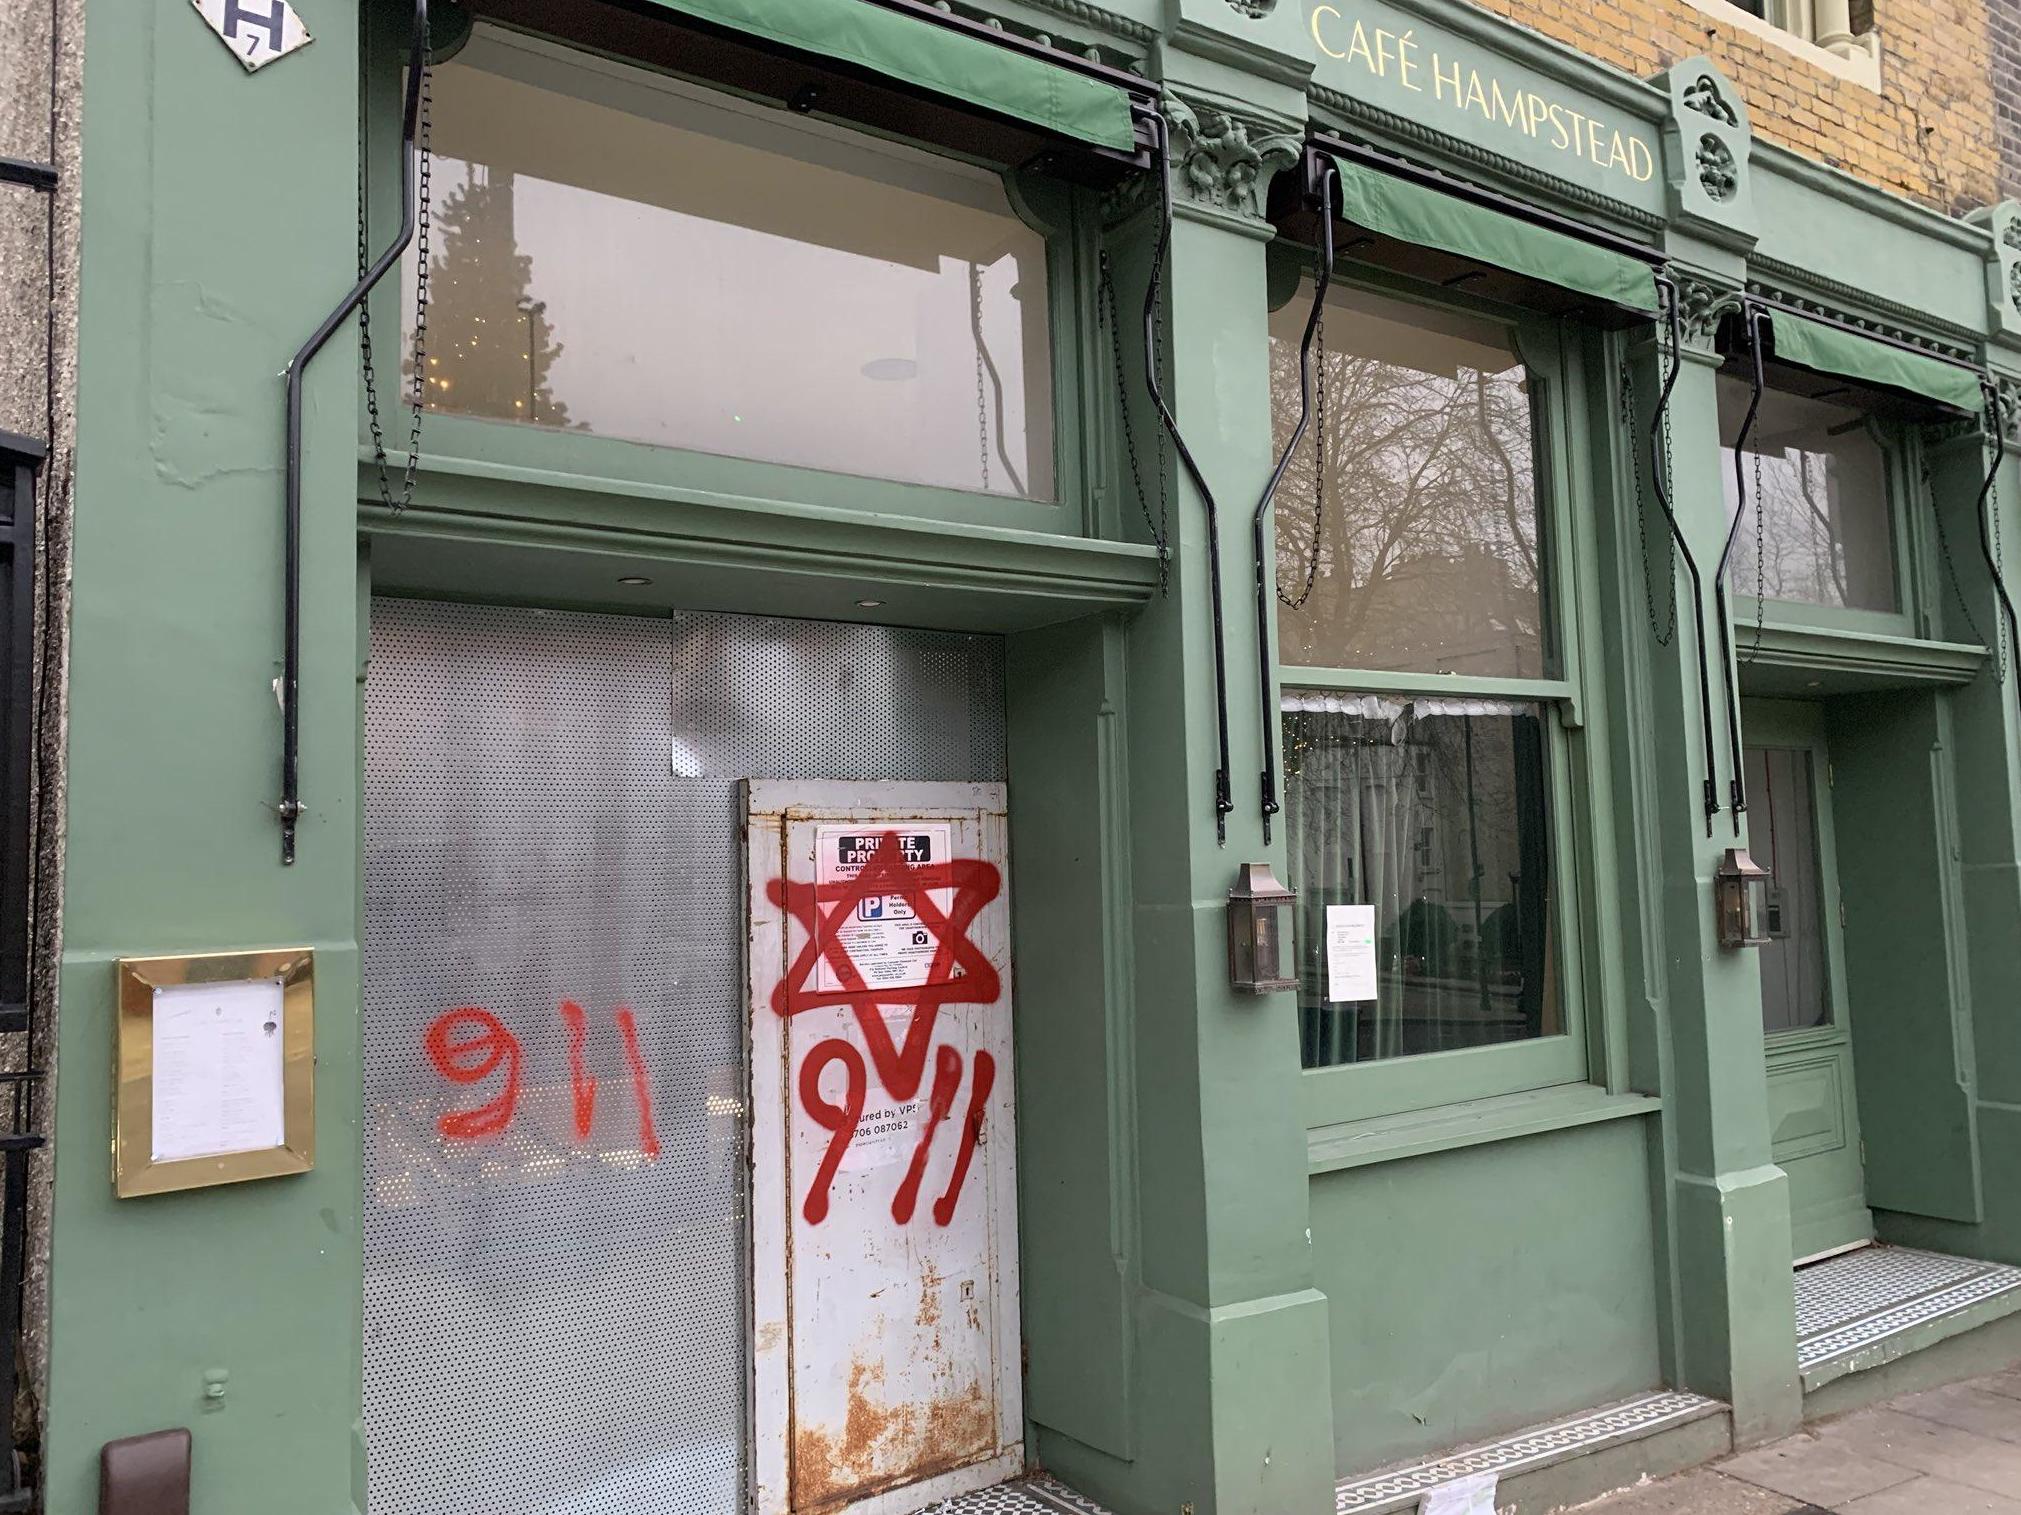 'Sickening' antisemitic graffiti on synagogue and shops in London investigated by police